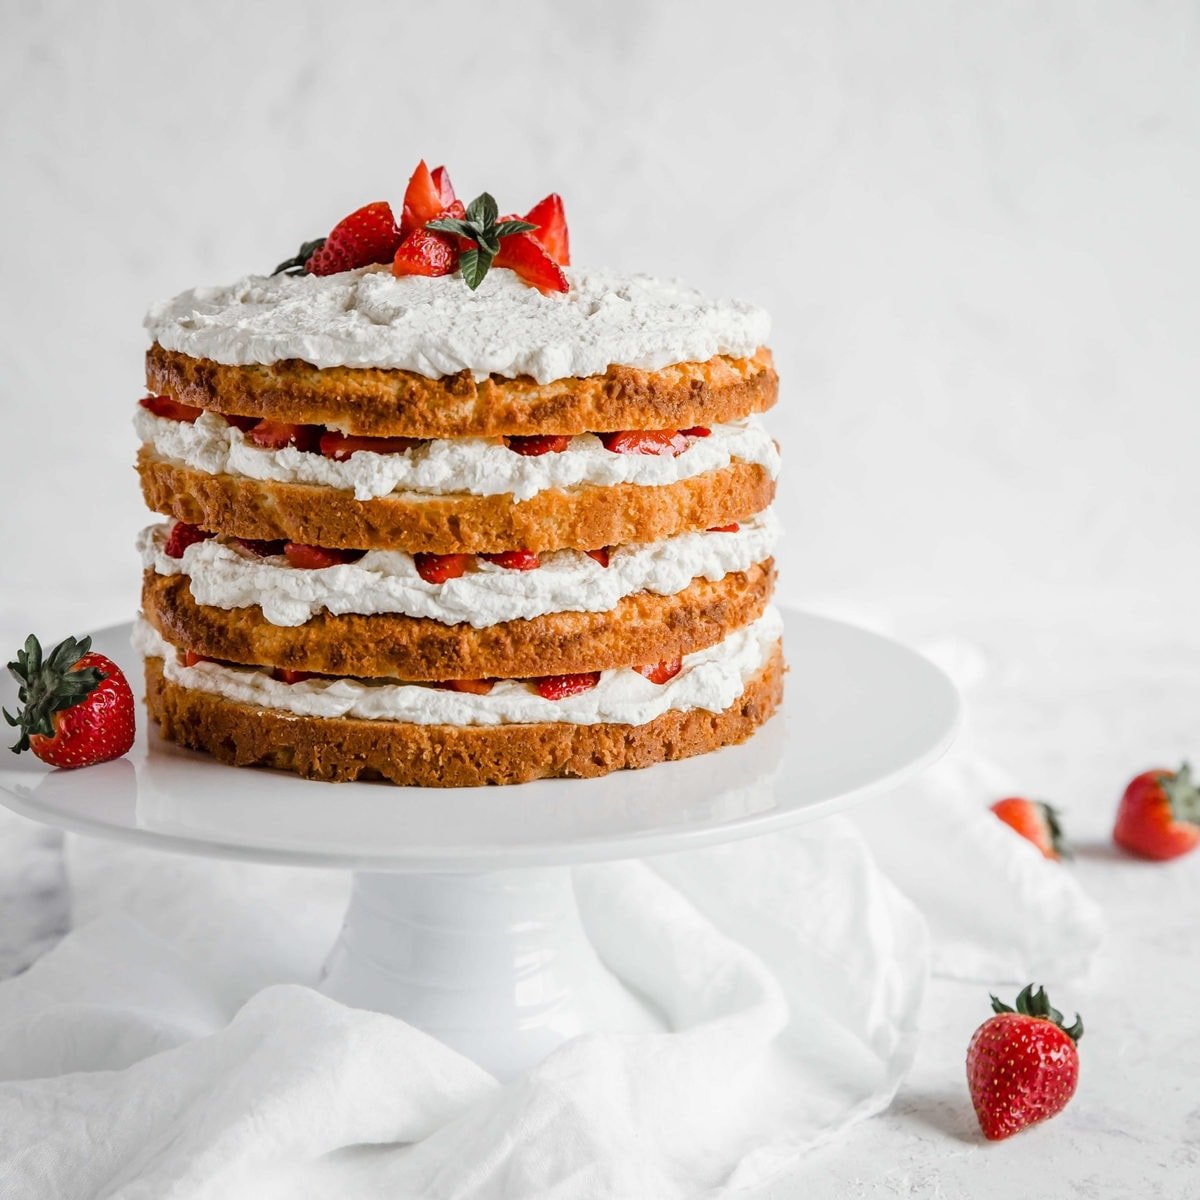 Keto Strawberry Shortcake with 4 layers of cake, whipped cream and strawberries on a cake stand.